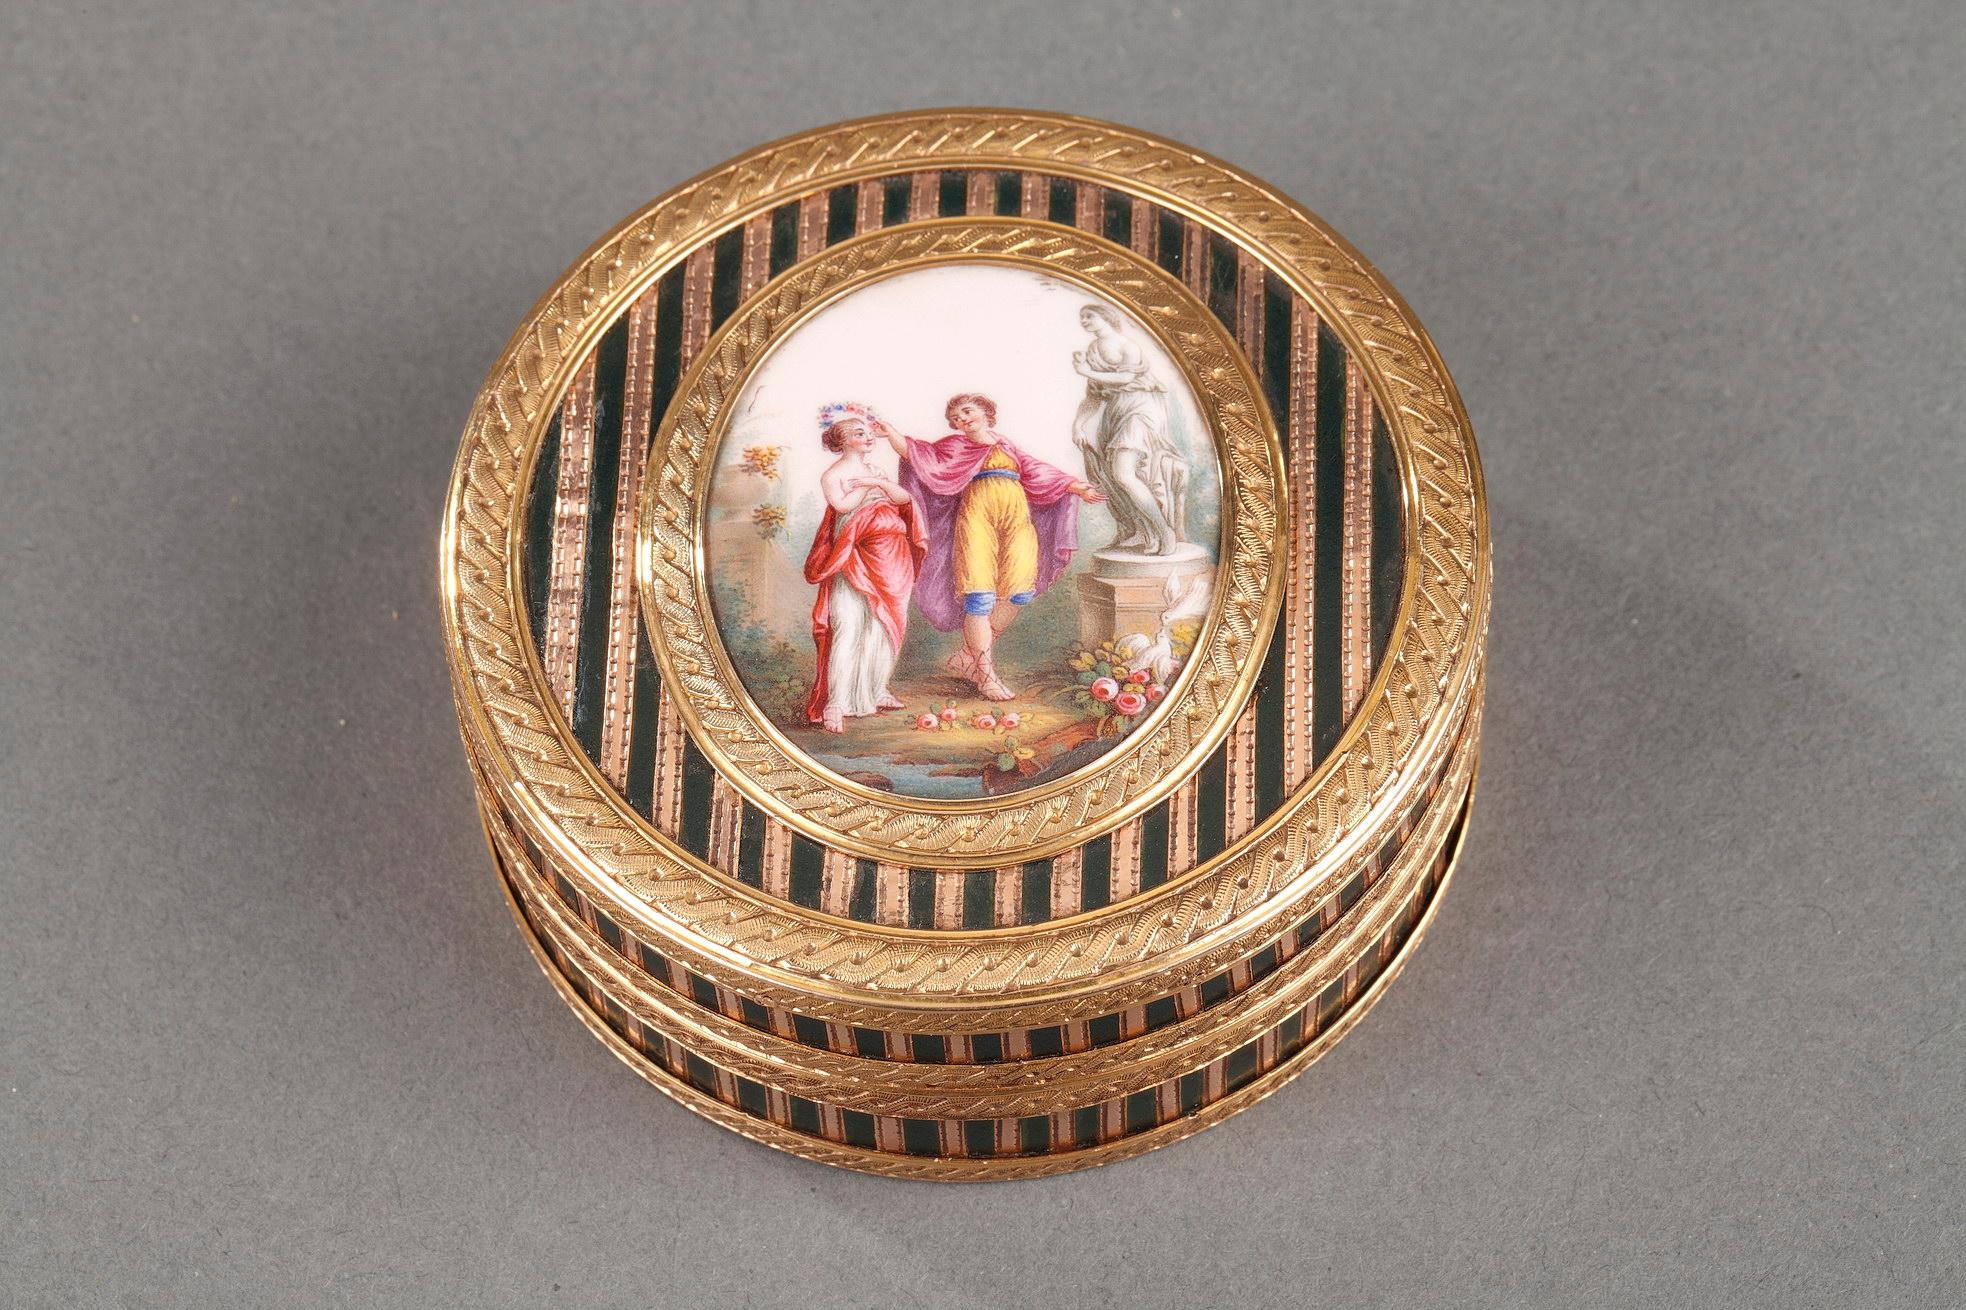 Circular box in several shades of gold, enamel, and composite materials. The box features varnish (lacquer) inlaid with thin bands of pink gold. A yellow gold mounting embellished with an interlaced motif frames the box and a central, oval